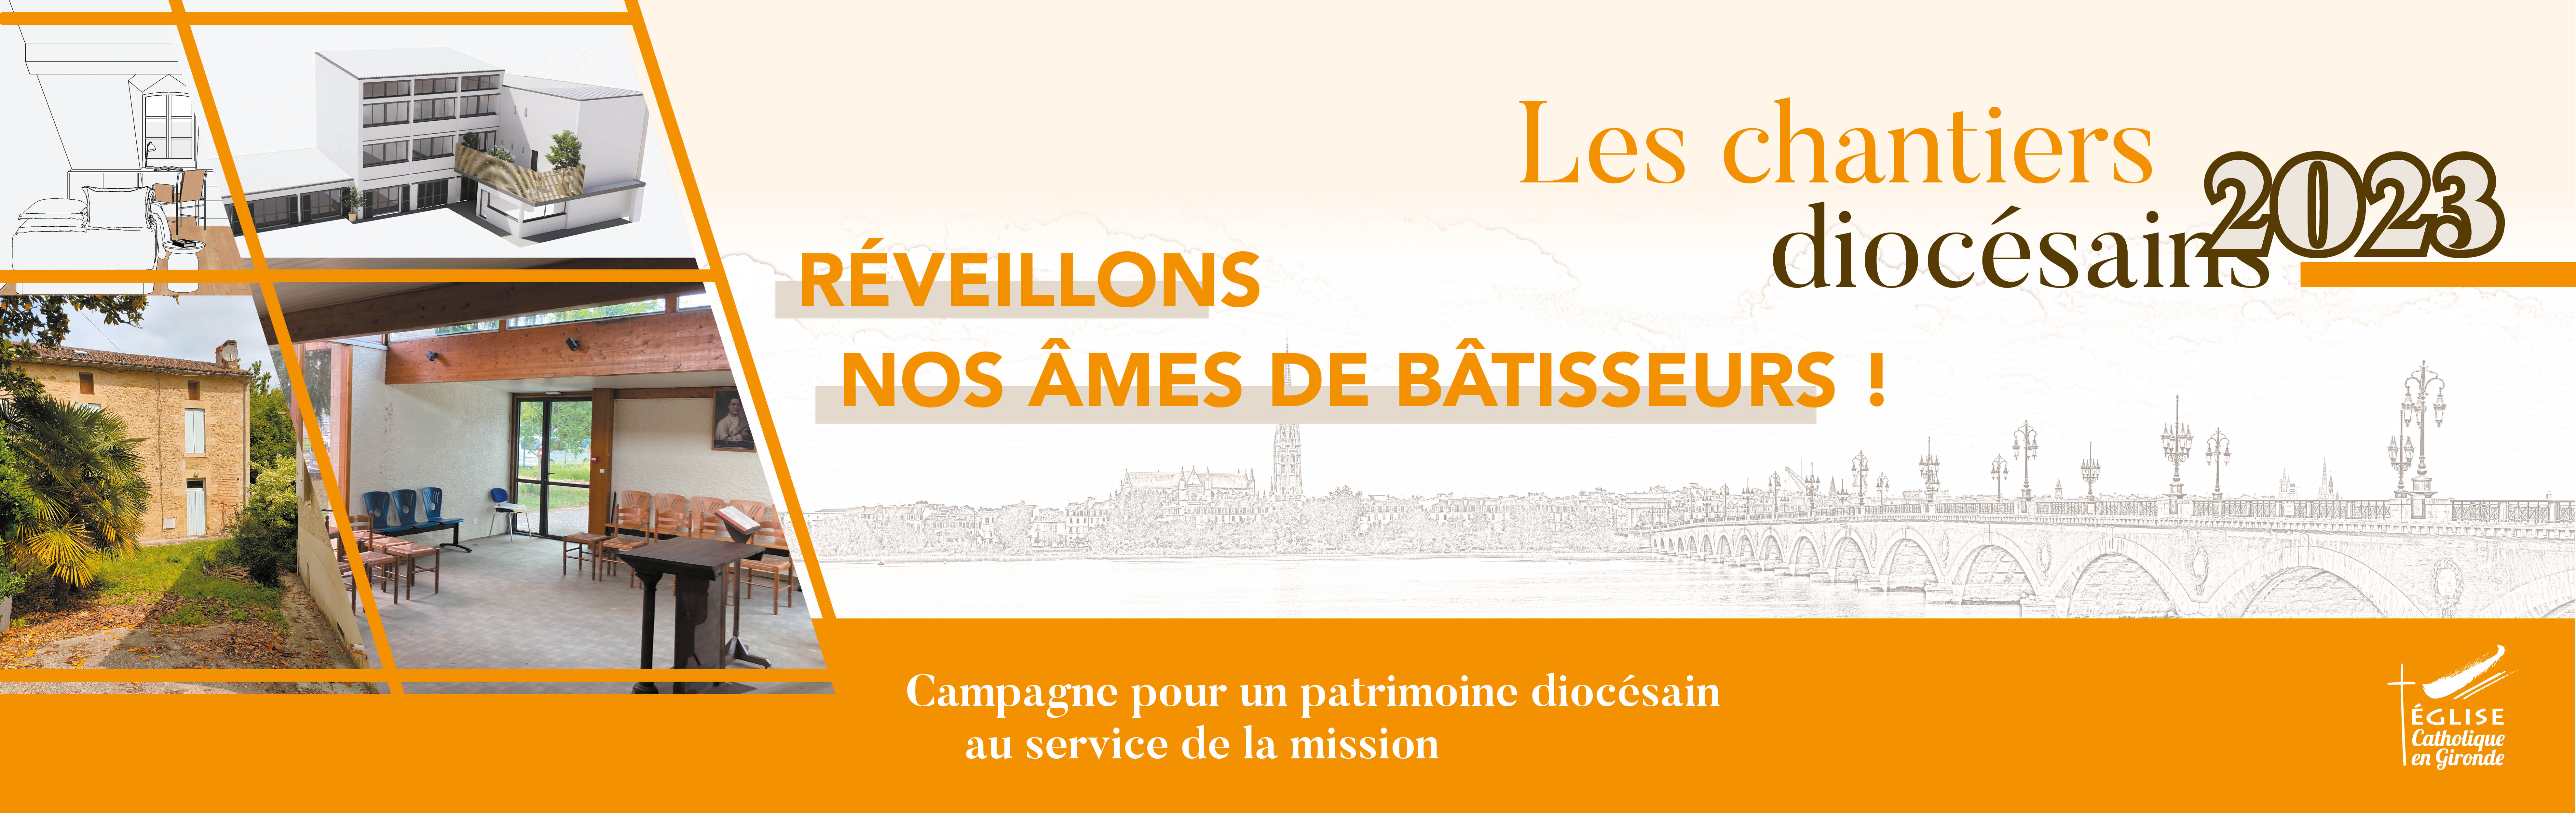 chantiers-diocesains-2023